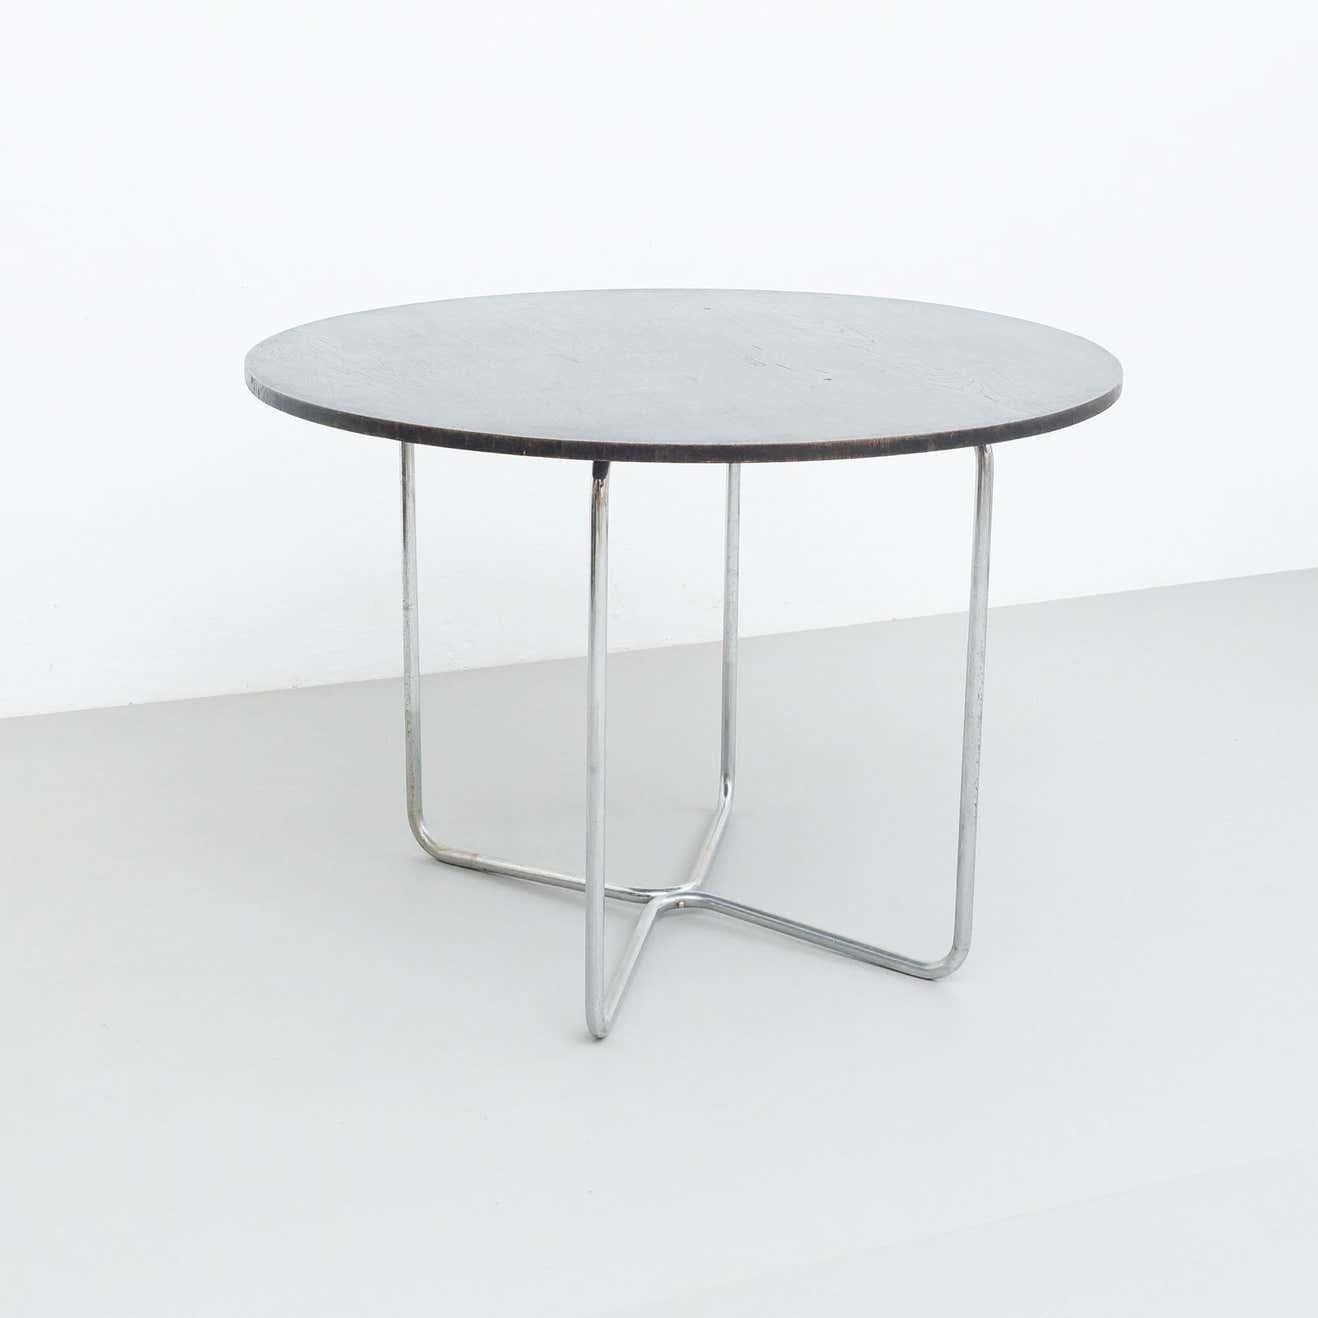 Marcel Breuer Table, circa 1940 In Good Condition For Sale In Barcelona, Barcelona